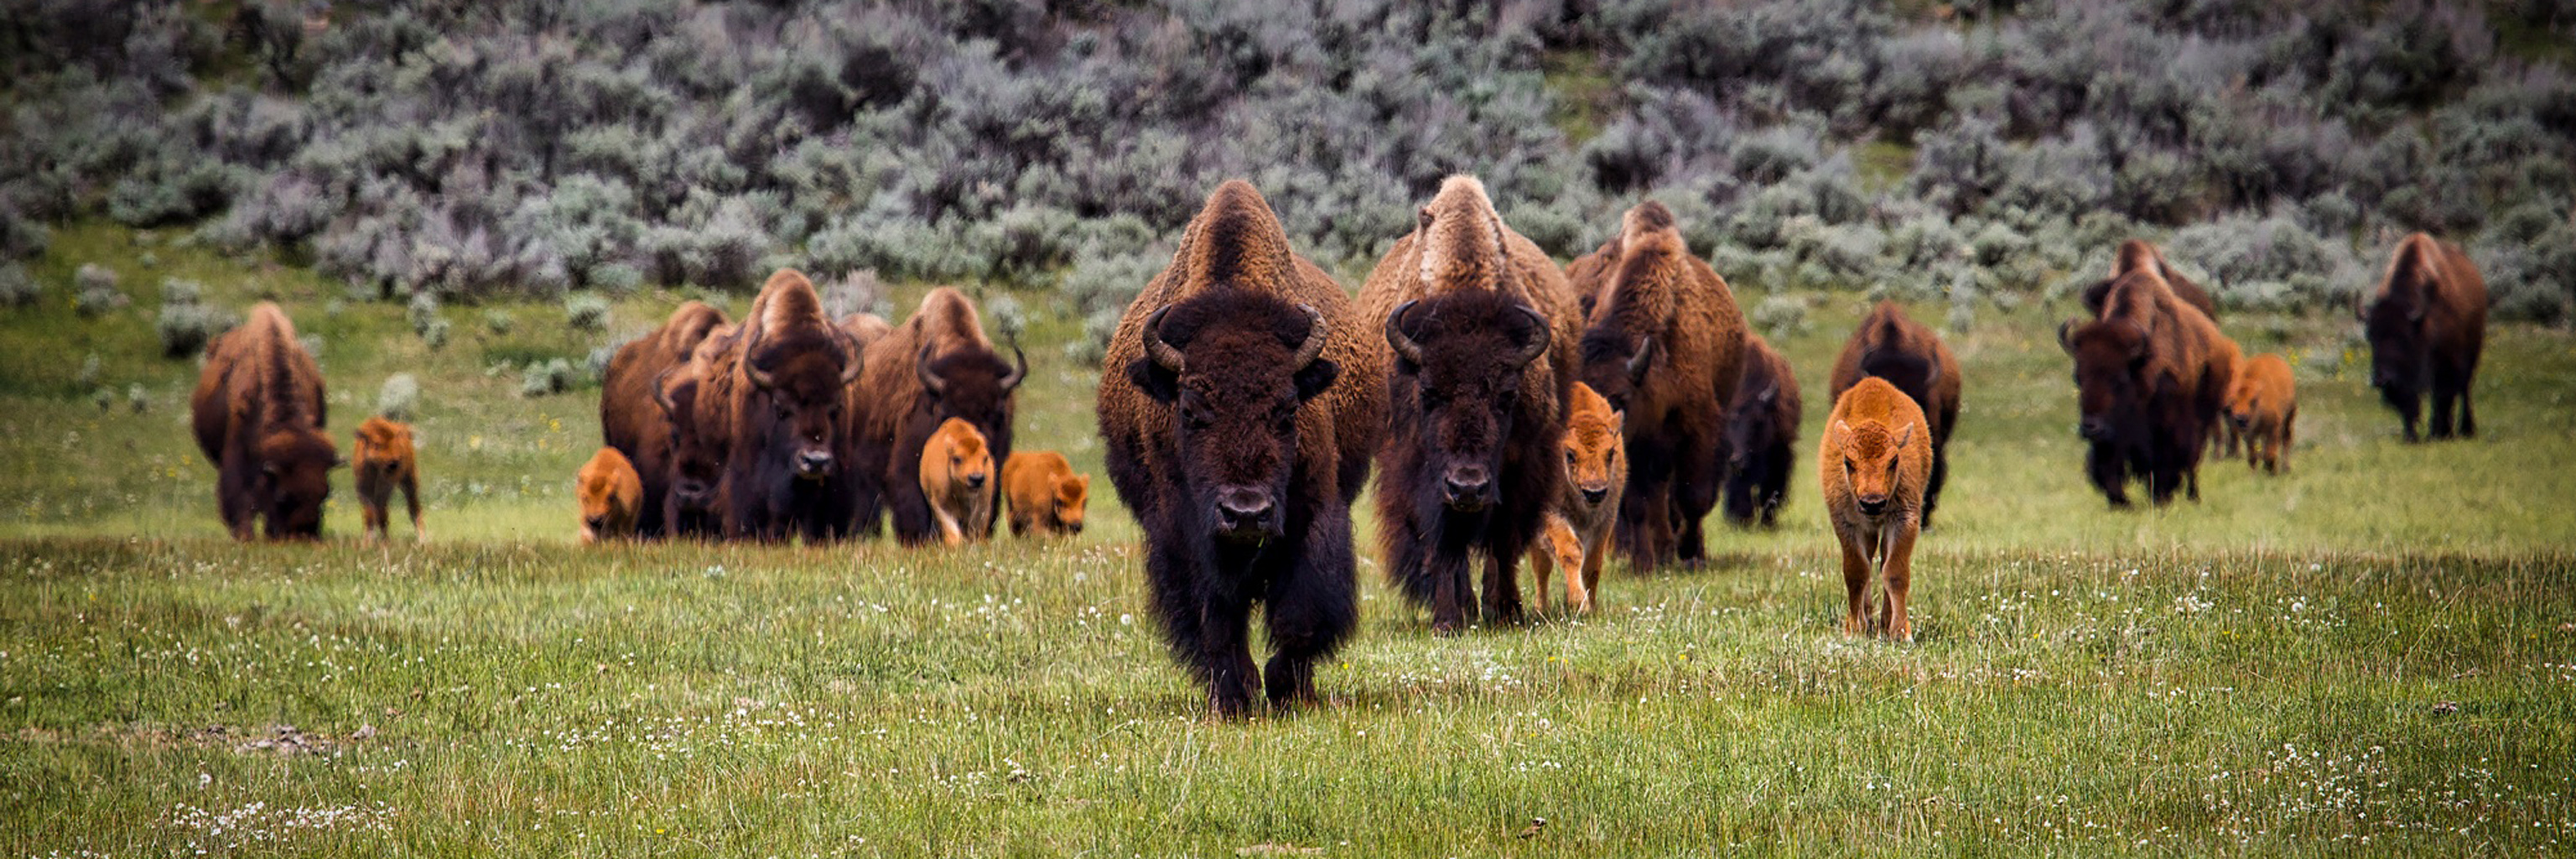 A herd of bison in a prairie